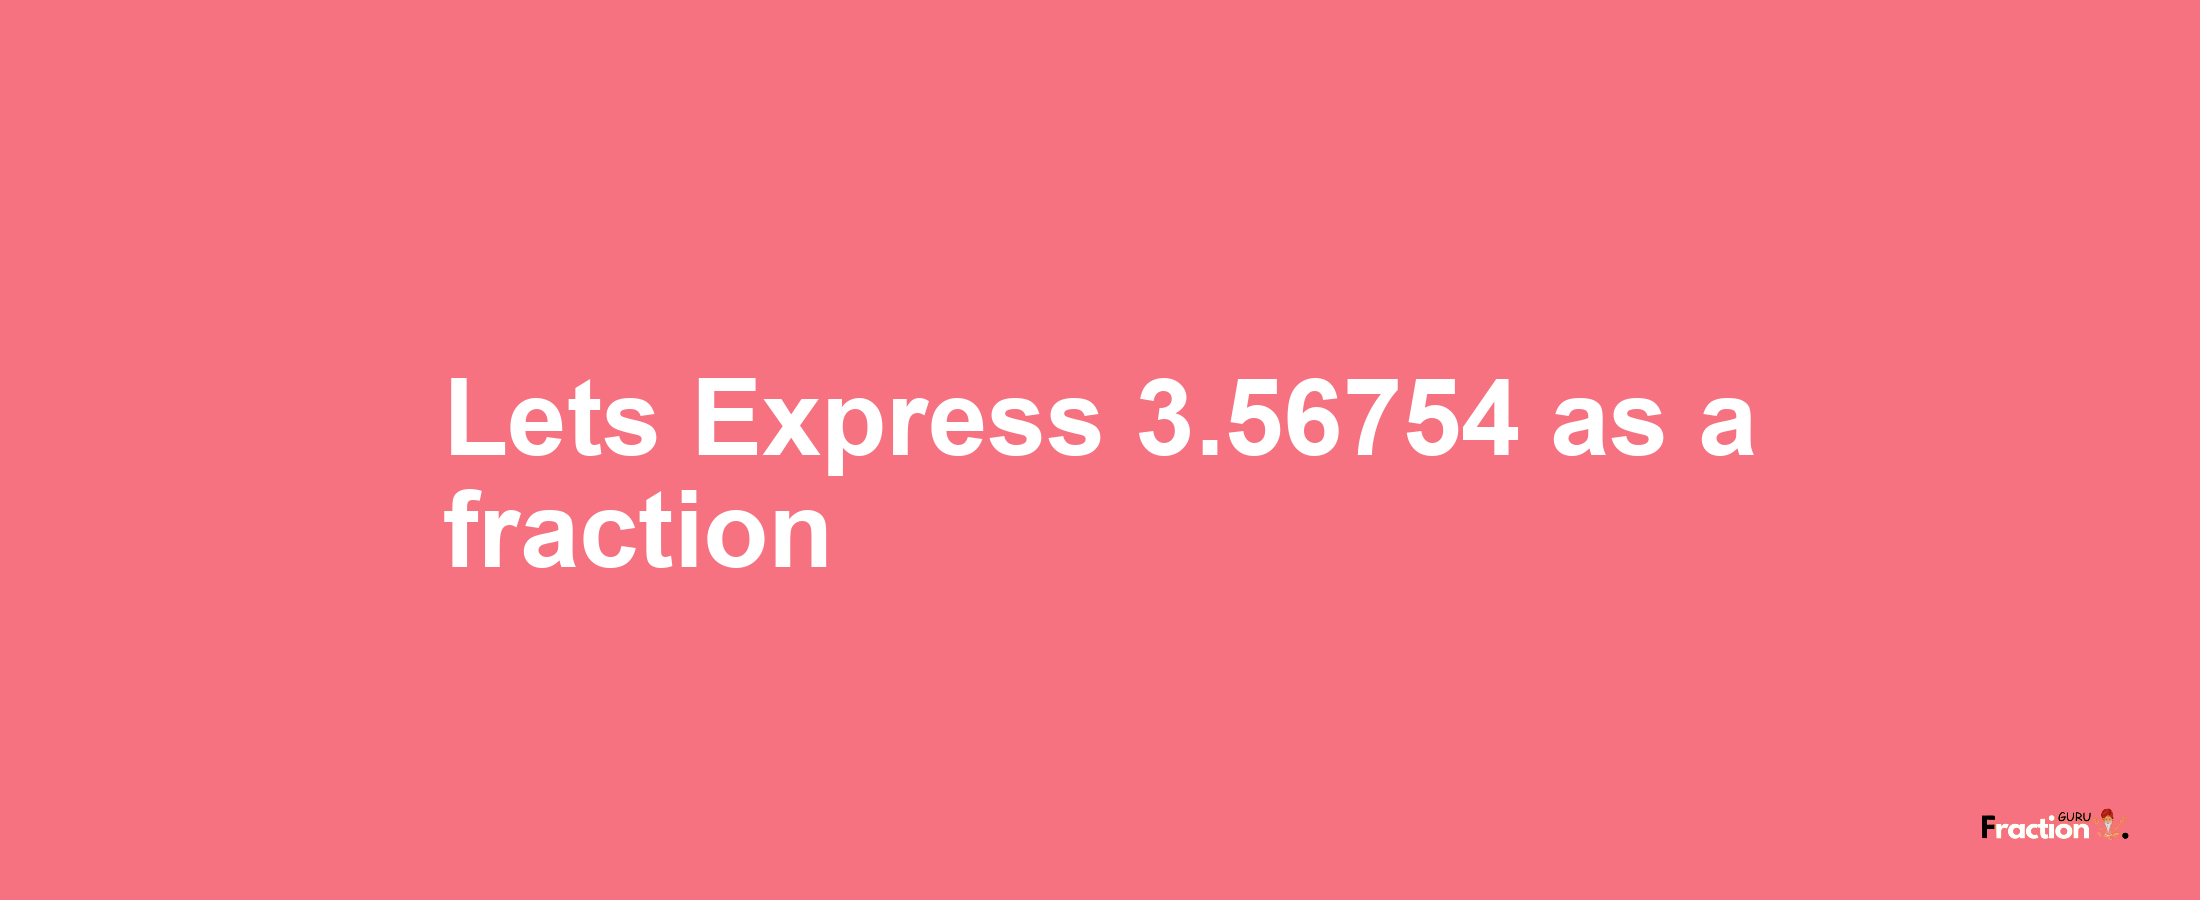 Lets Express 3.56754 as afraction